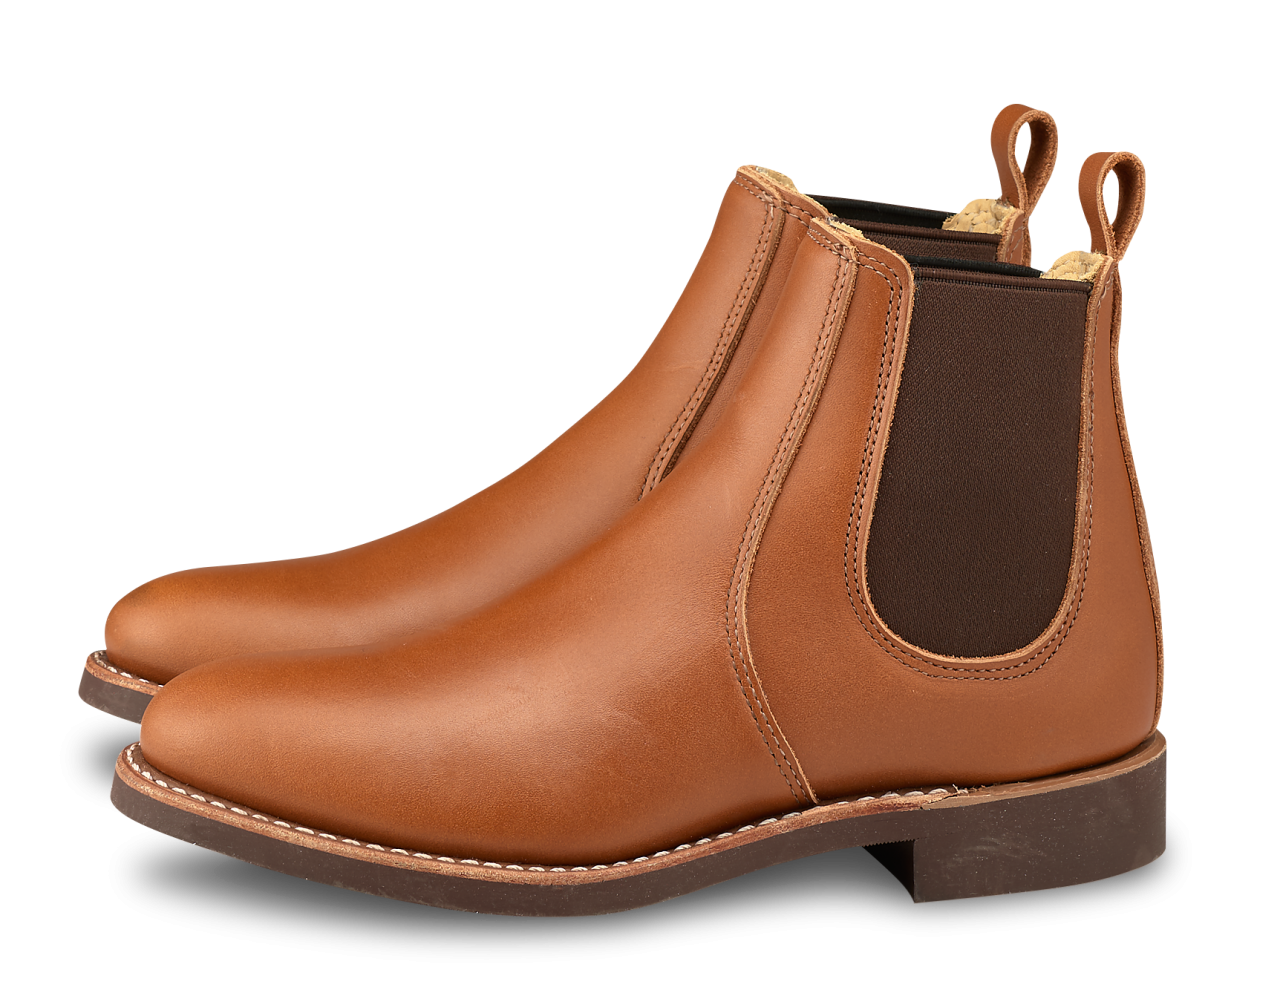 Red Wing 3456 Flat Chelsea